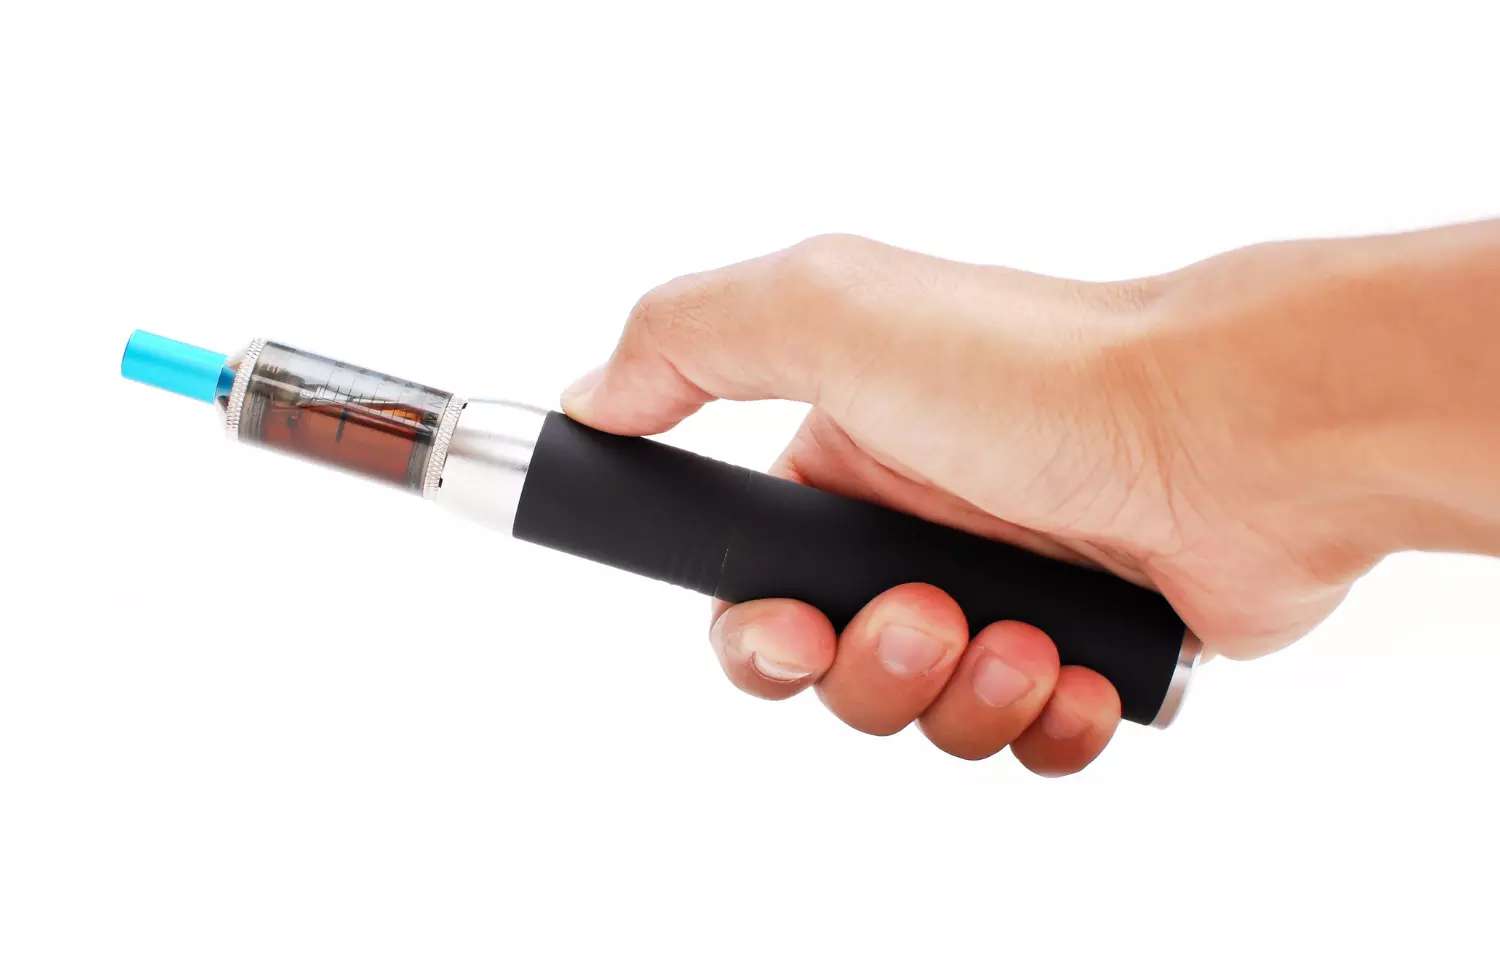 E-cigarettes safer and more effective than nicotine patches to help pregnant women quit smoking